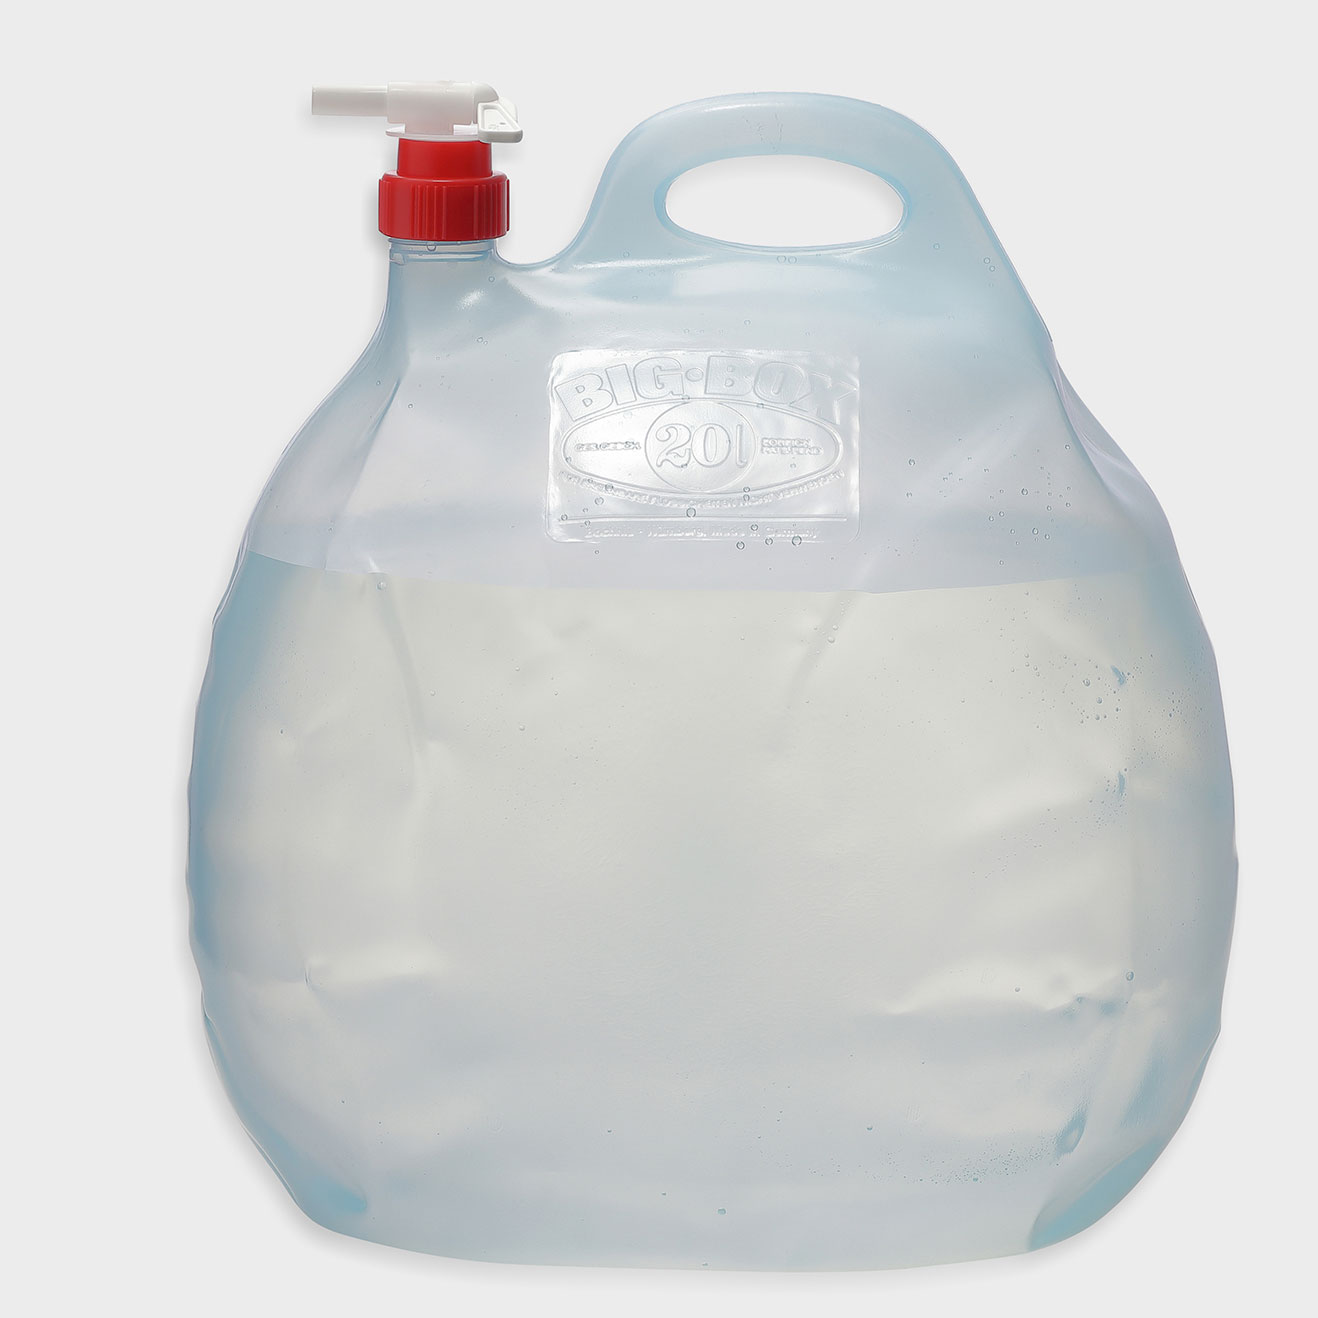 Brandrup water container, foldable, 20 liters